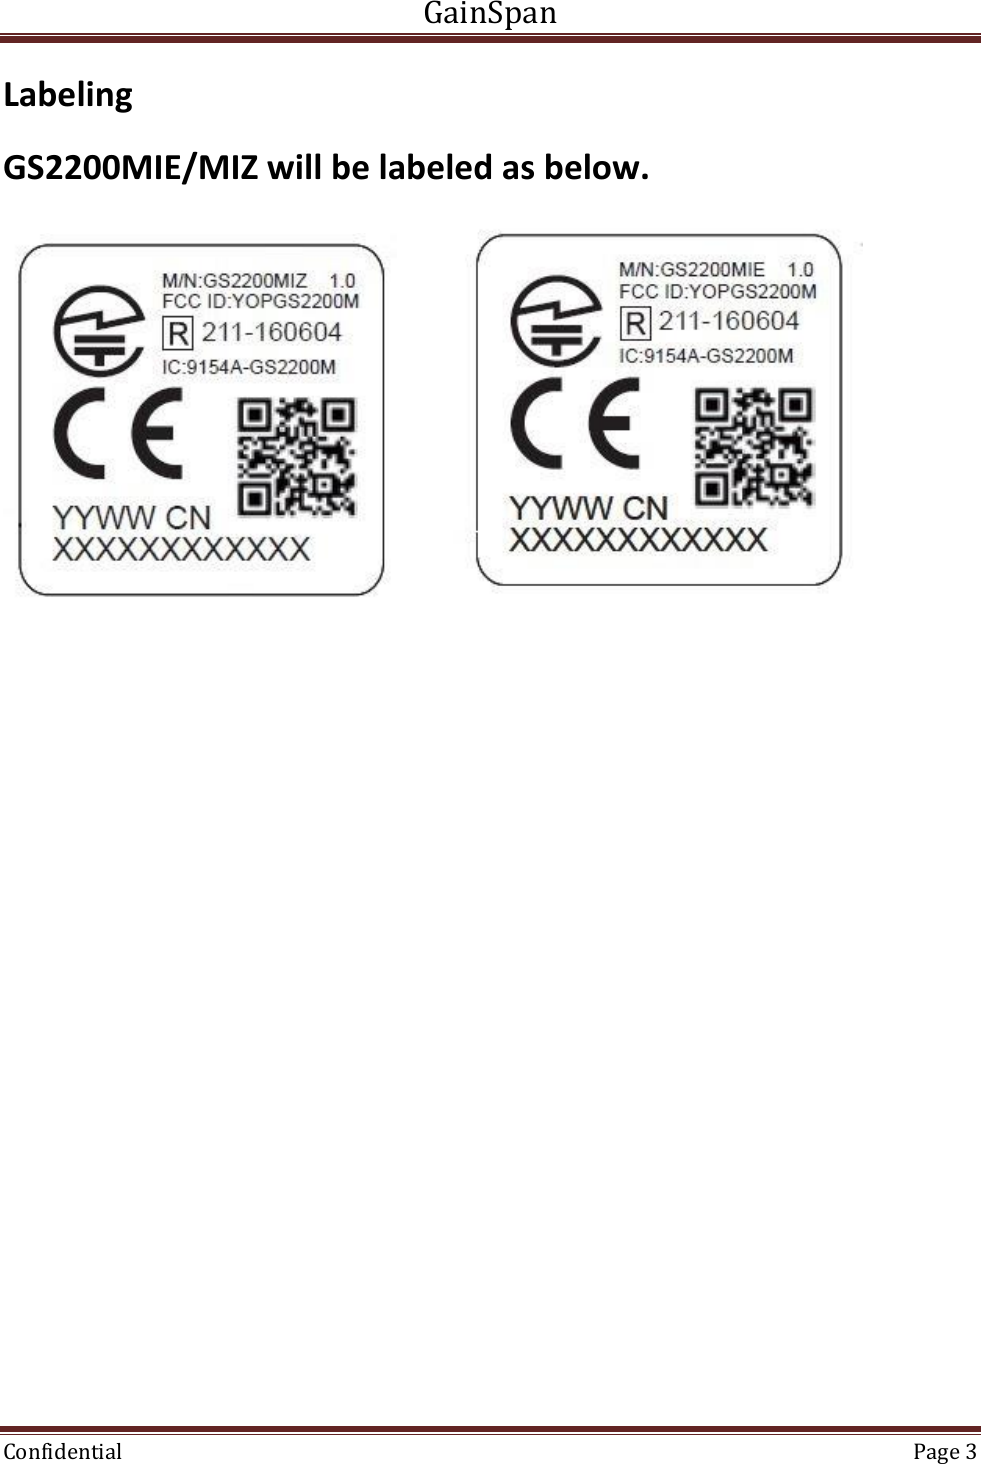 GainSpan  Confidential  Page 3  Labeling GS2200MIE/MIZ will be labeled as below.                             